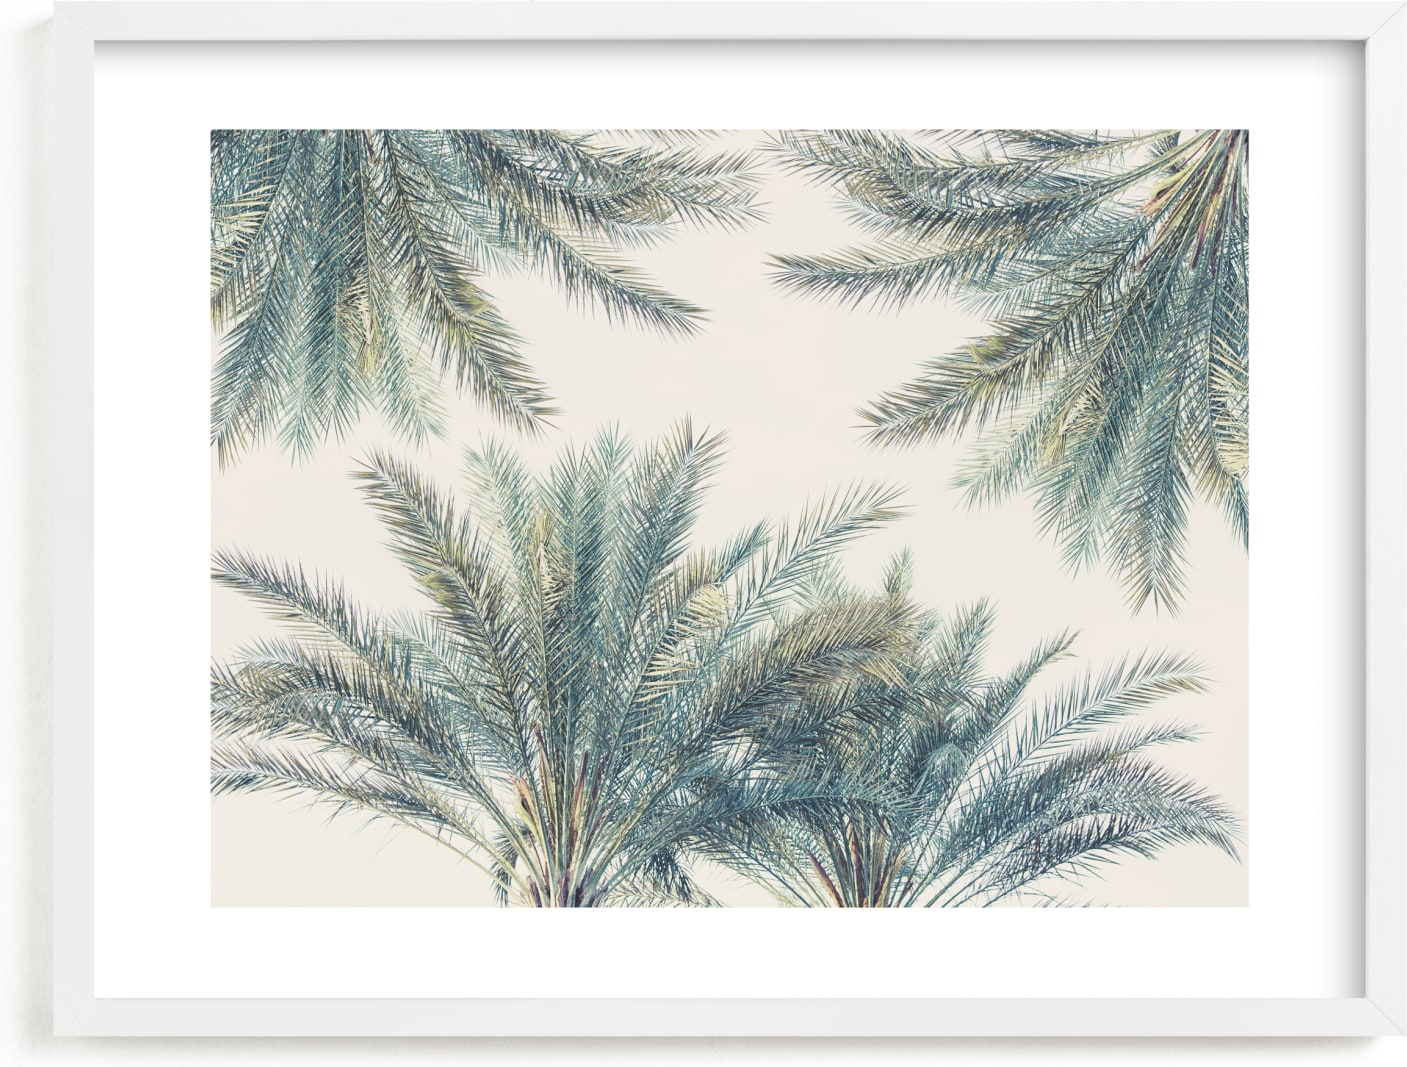 This is a beige kids wall art by Irene Suchocki called Fronds in High Places.